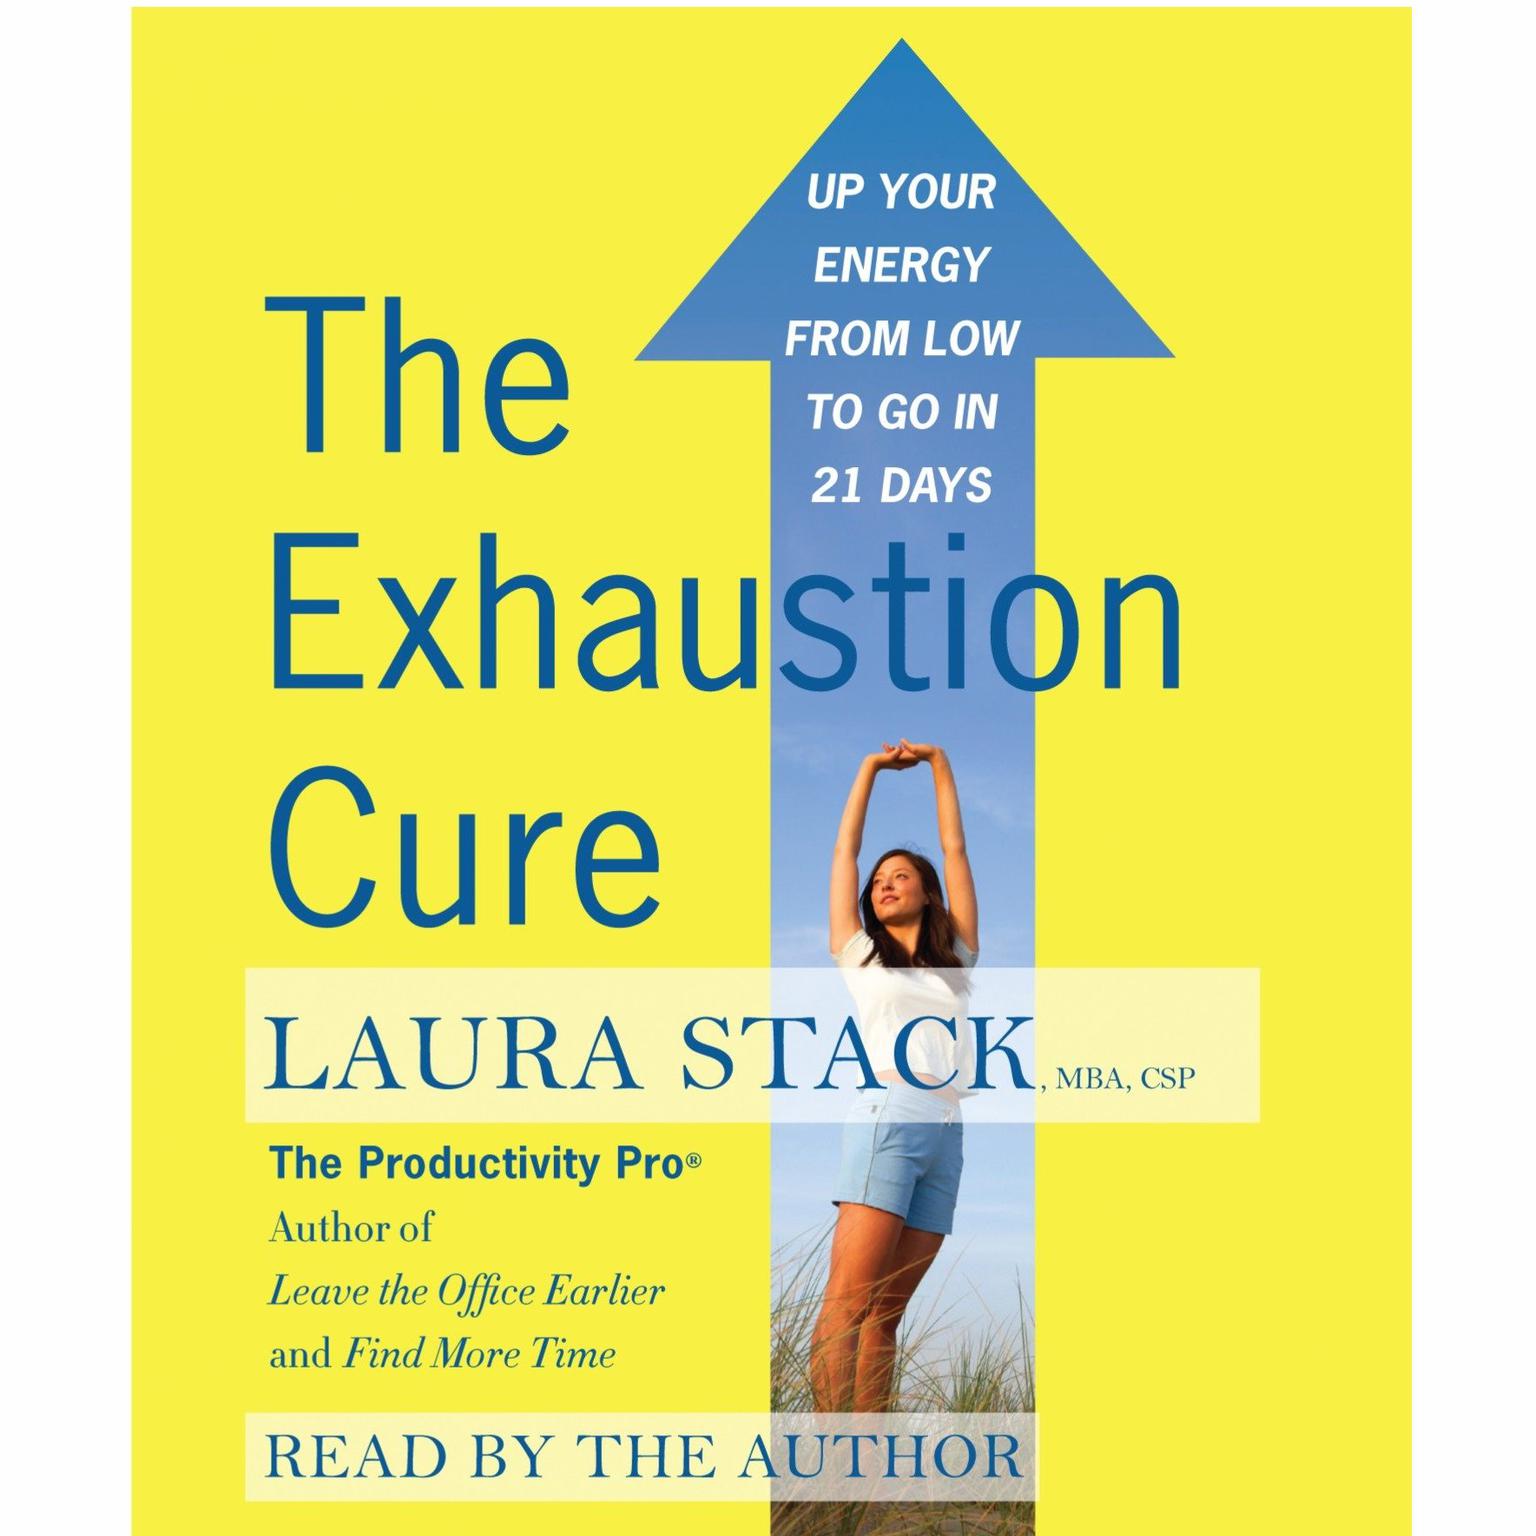 The Exhaustion Cure (Abridged): Up Your Energy from Low to Go in 21 Days Audiobook, by Laura Stack